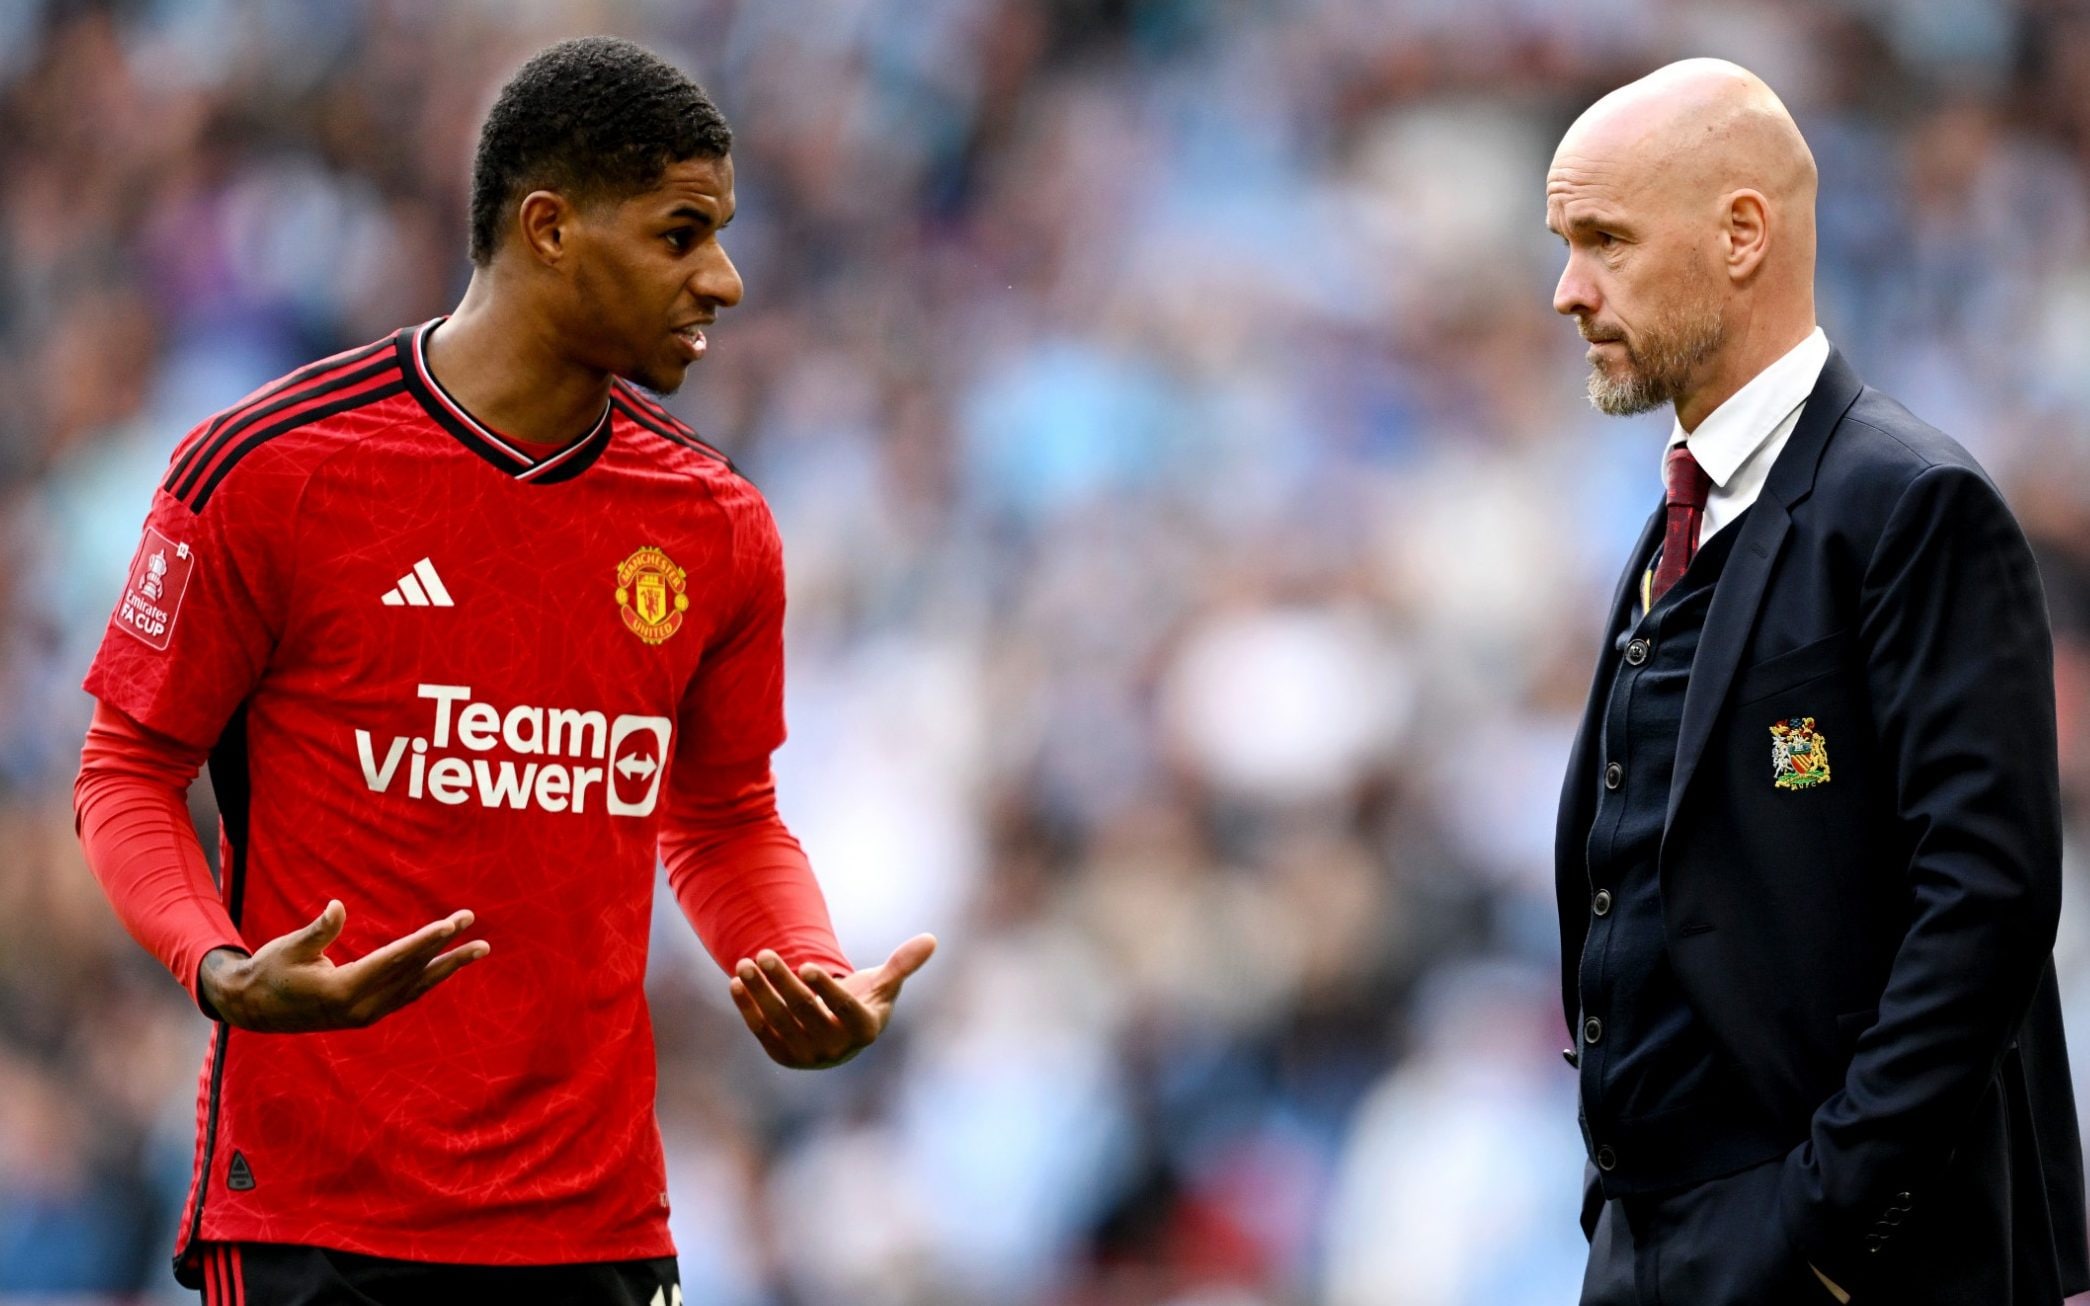 erik ten hag: marcus rashford abuse is wrong but he must accept share of blame for failings